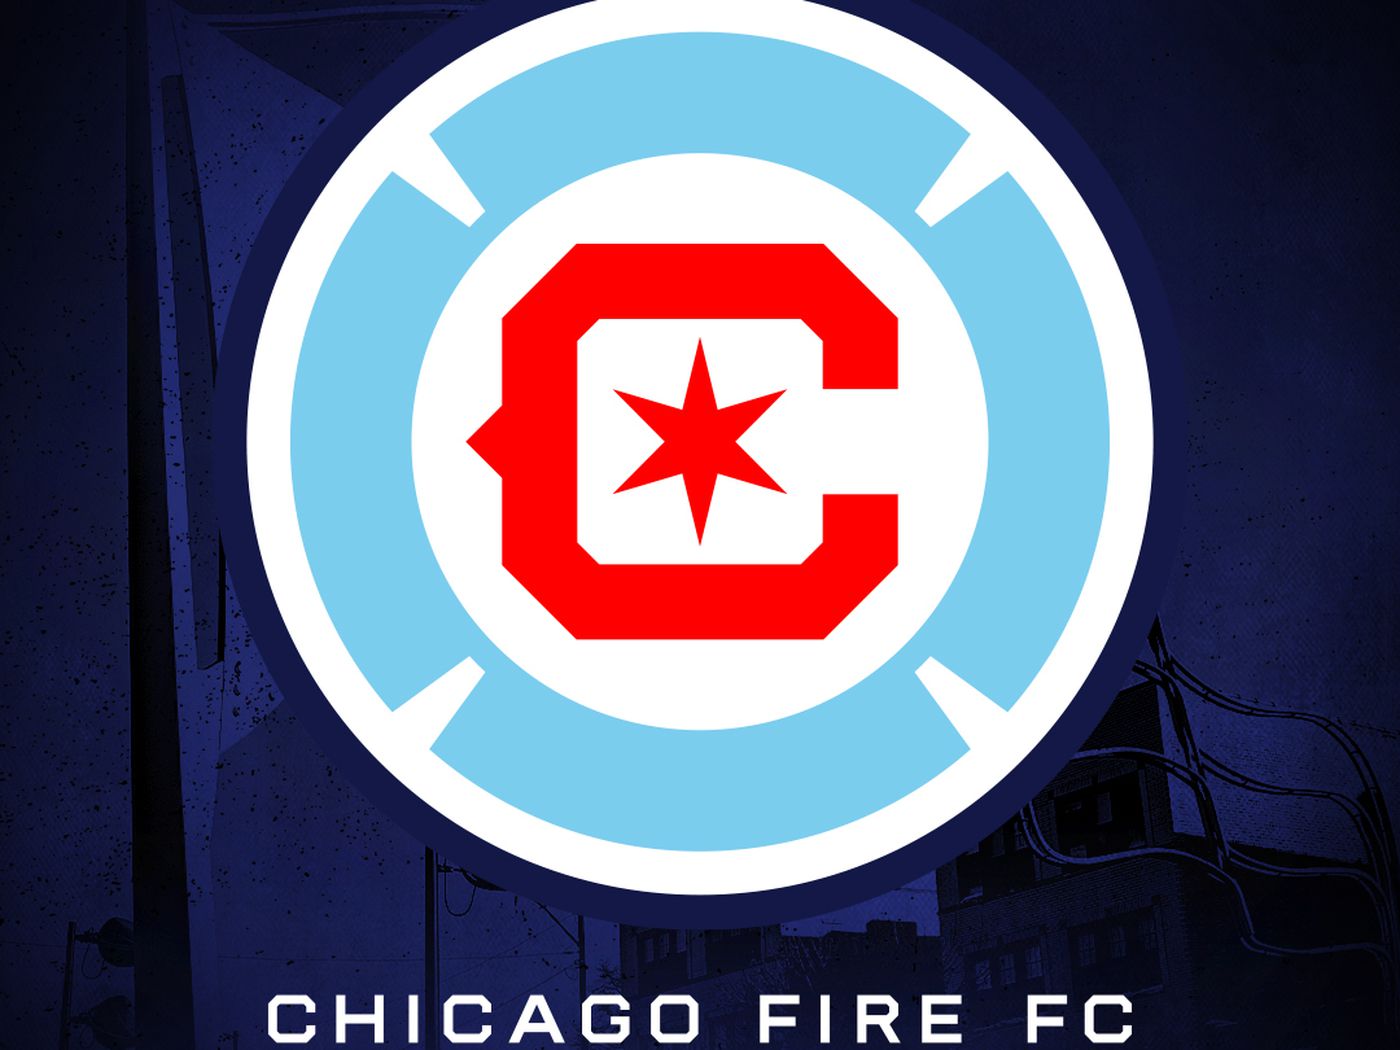 The Chicago Fire have a new logo and this time they got it right